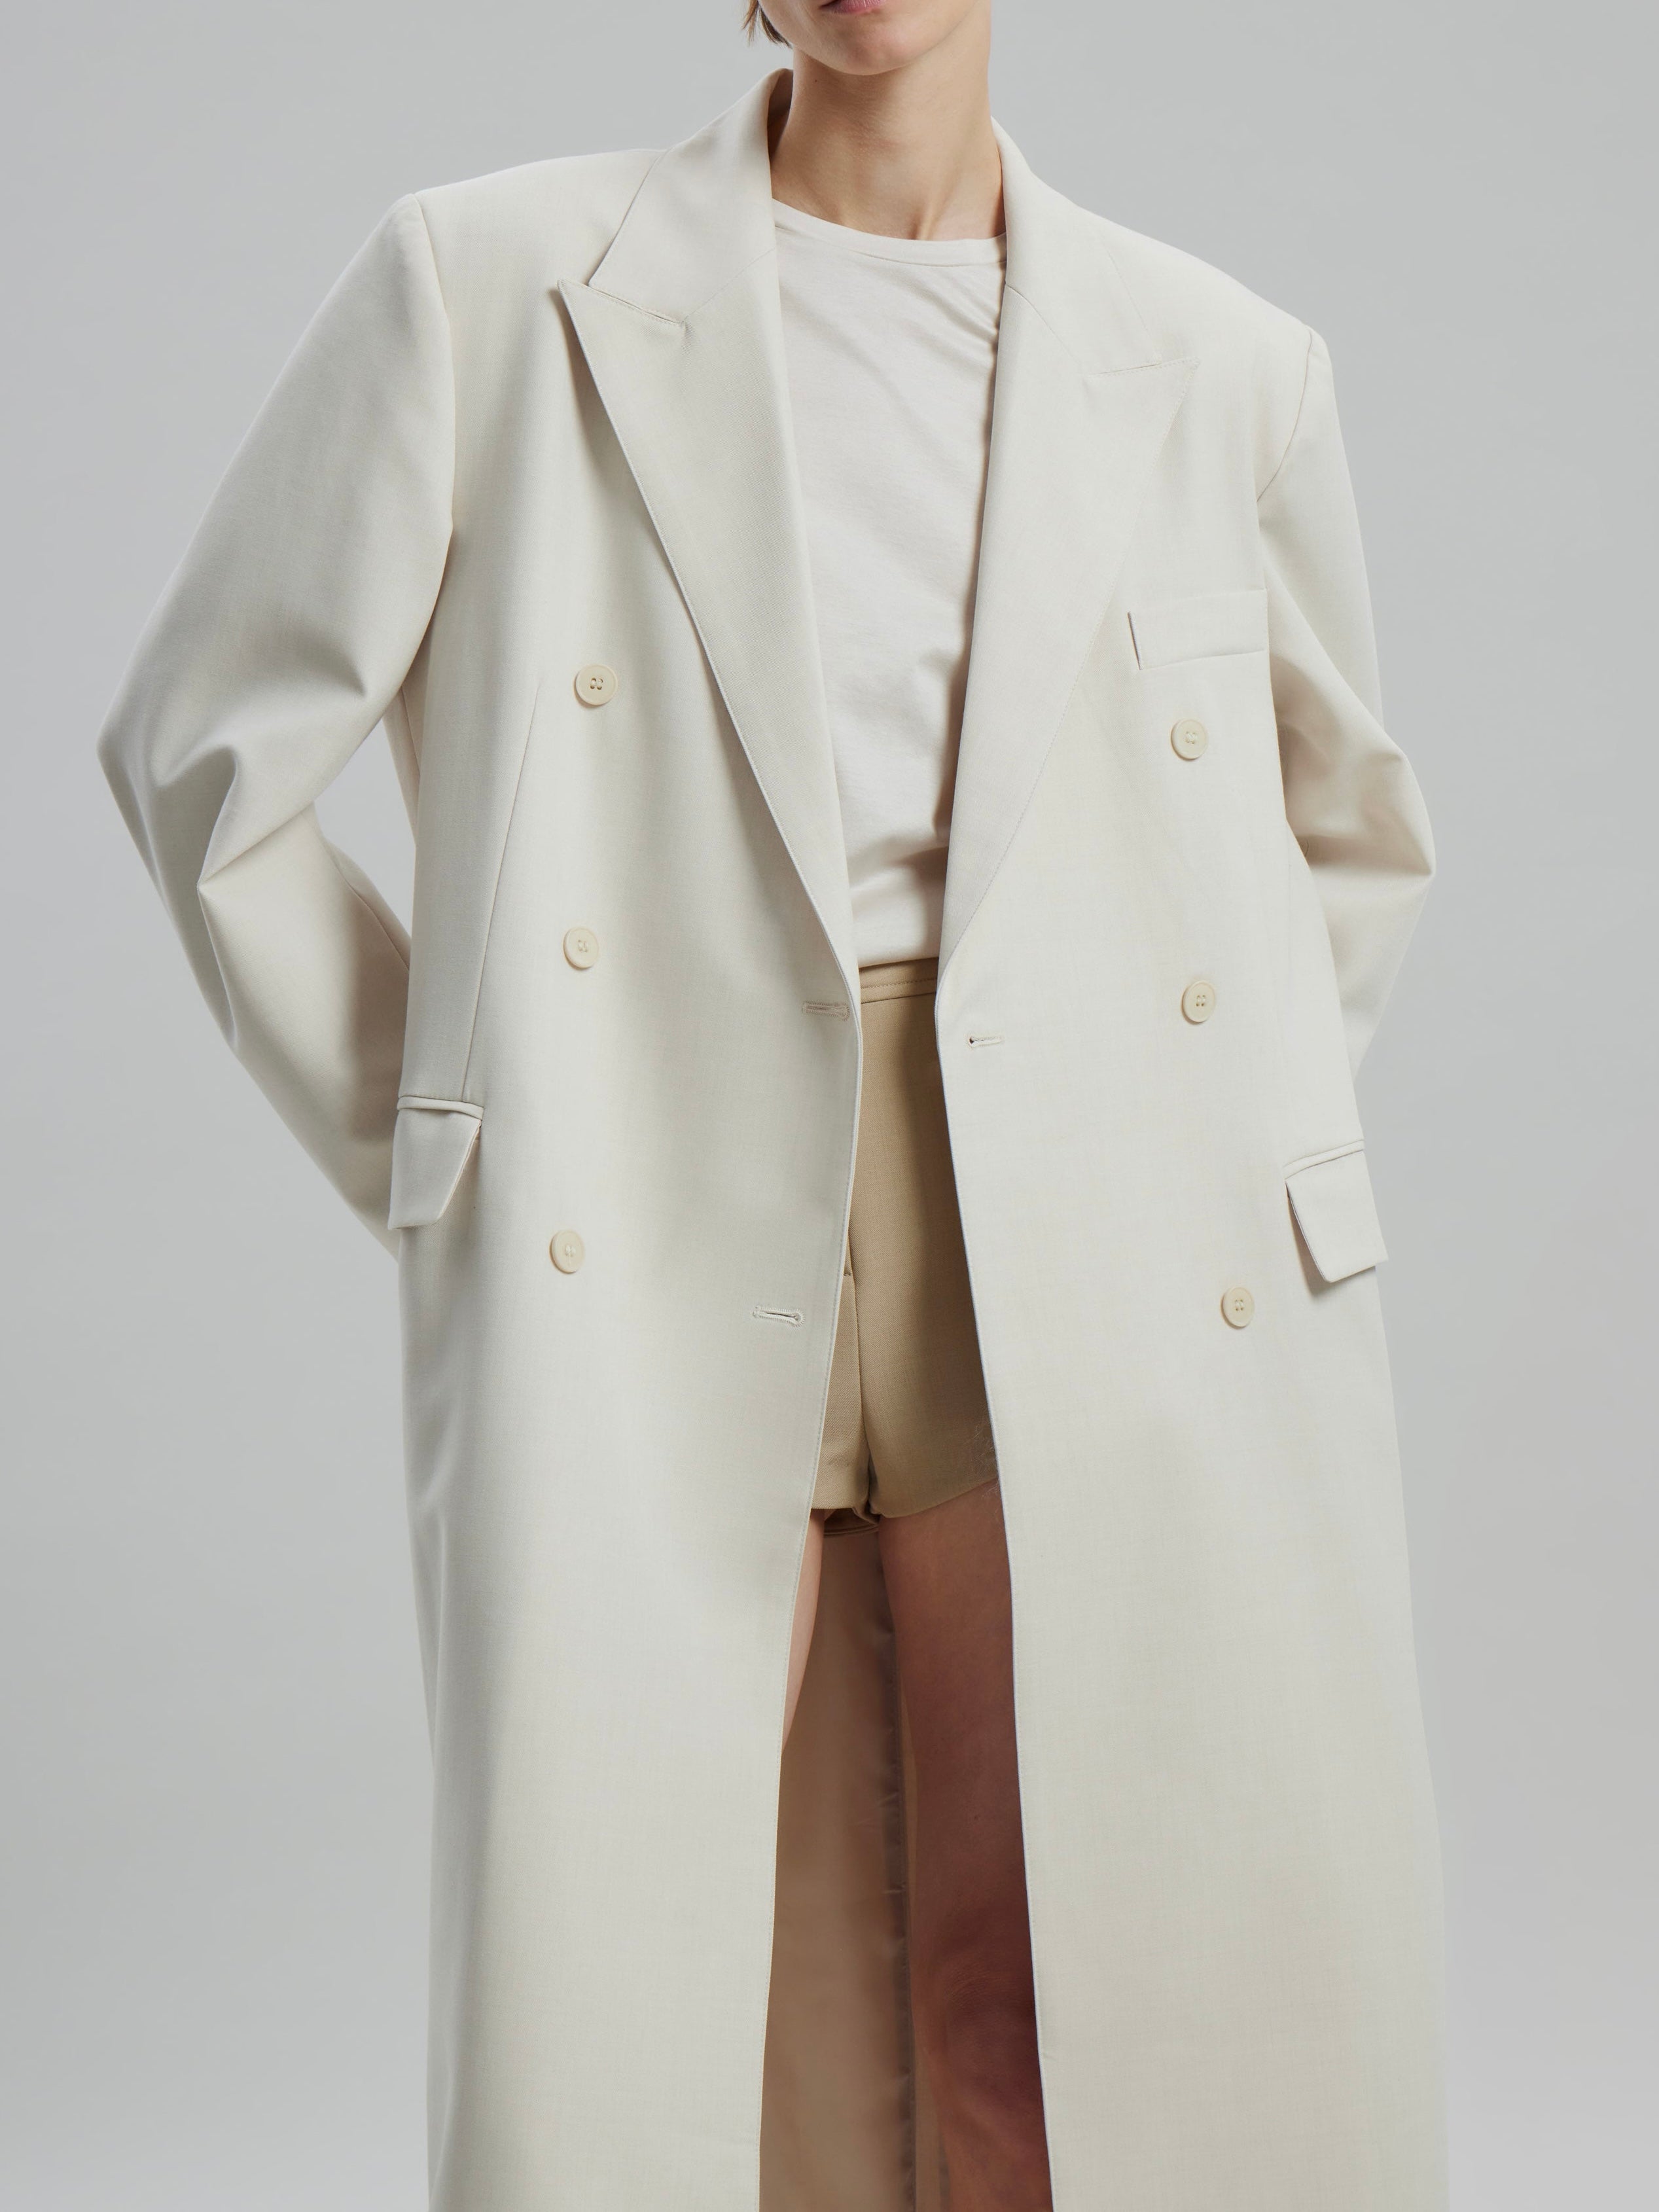 Gemma Double Breasted Coat in Eggshell